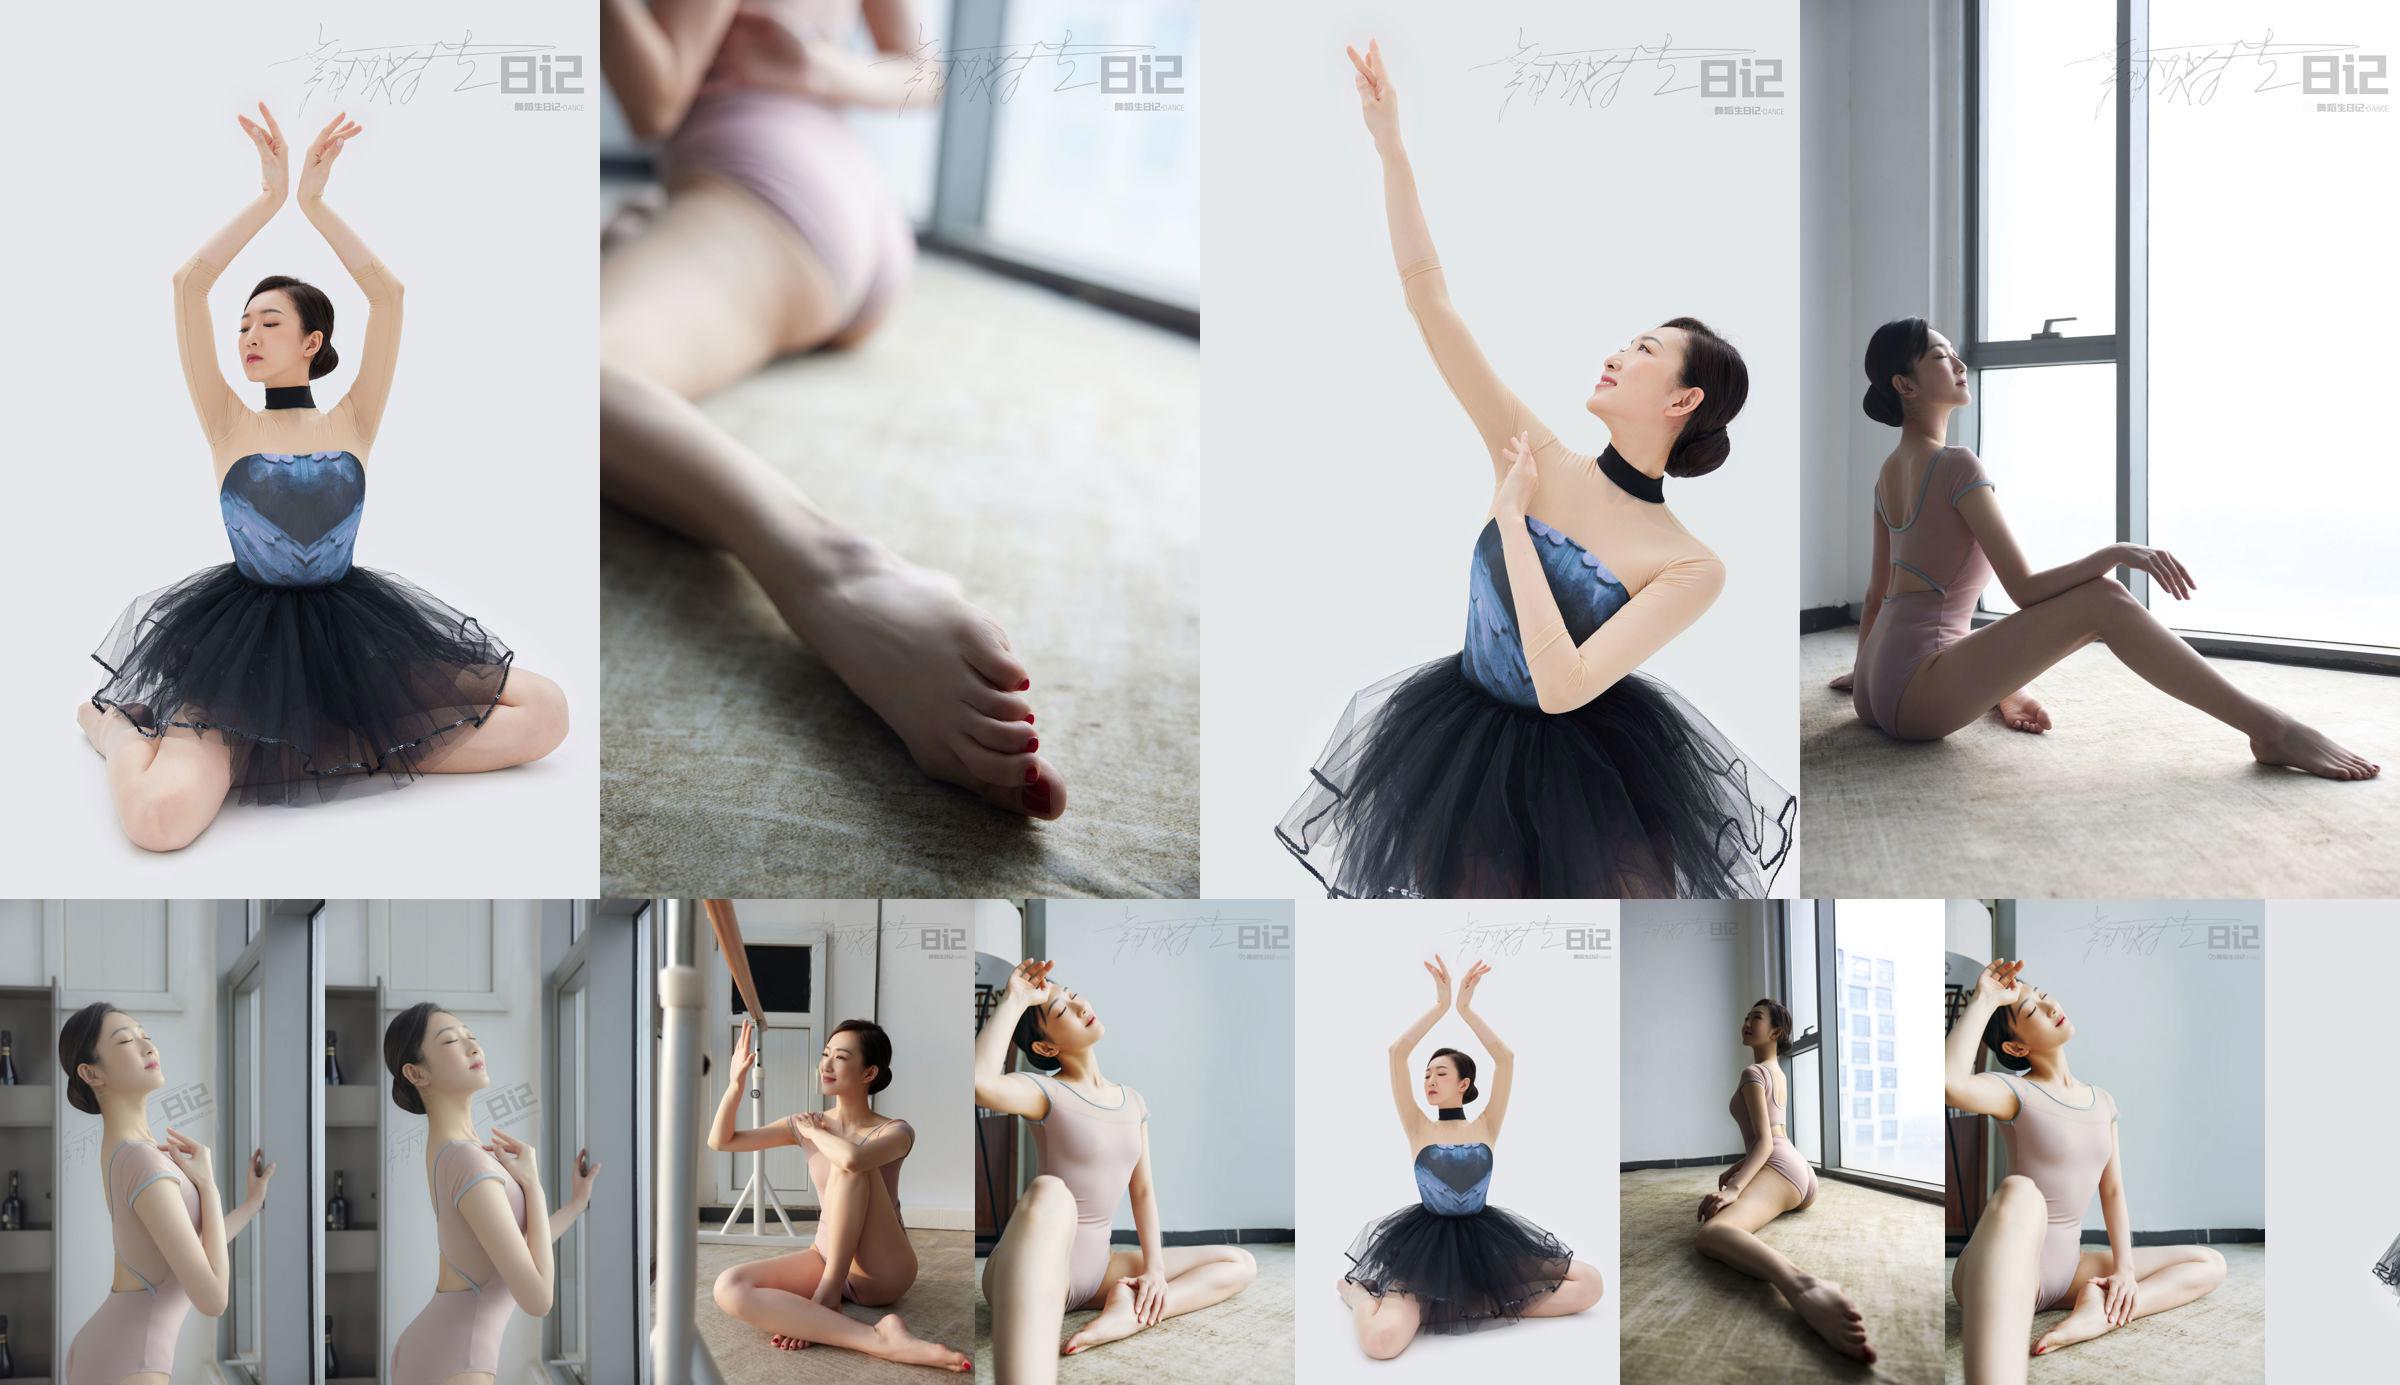 [GALLI Jiali] Diary of a Dance Student 059 Dong Dong No.d1a8d6 หน้า 1